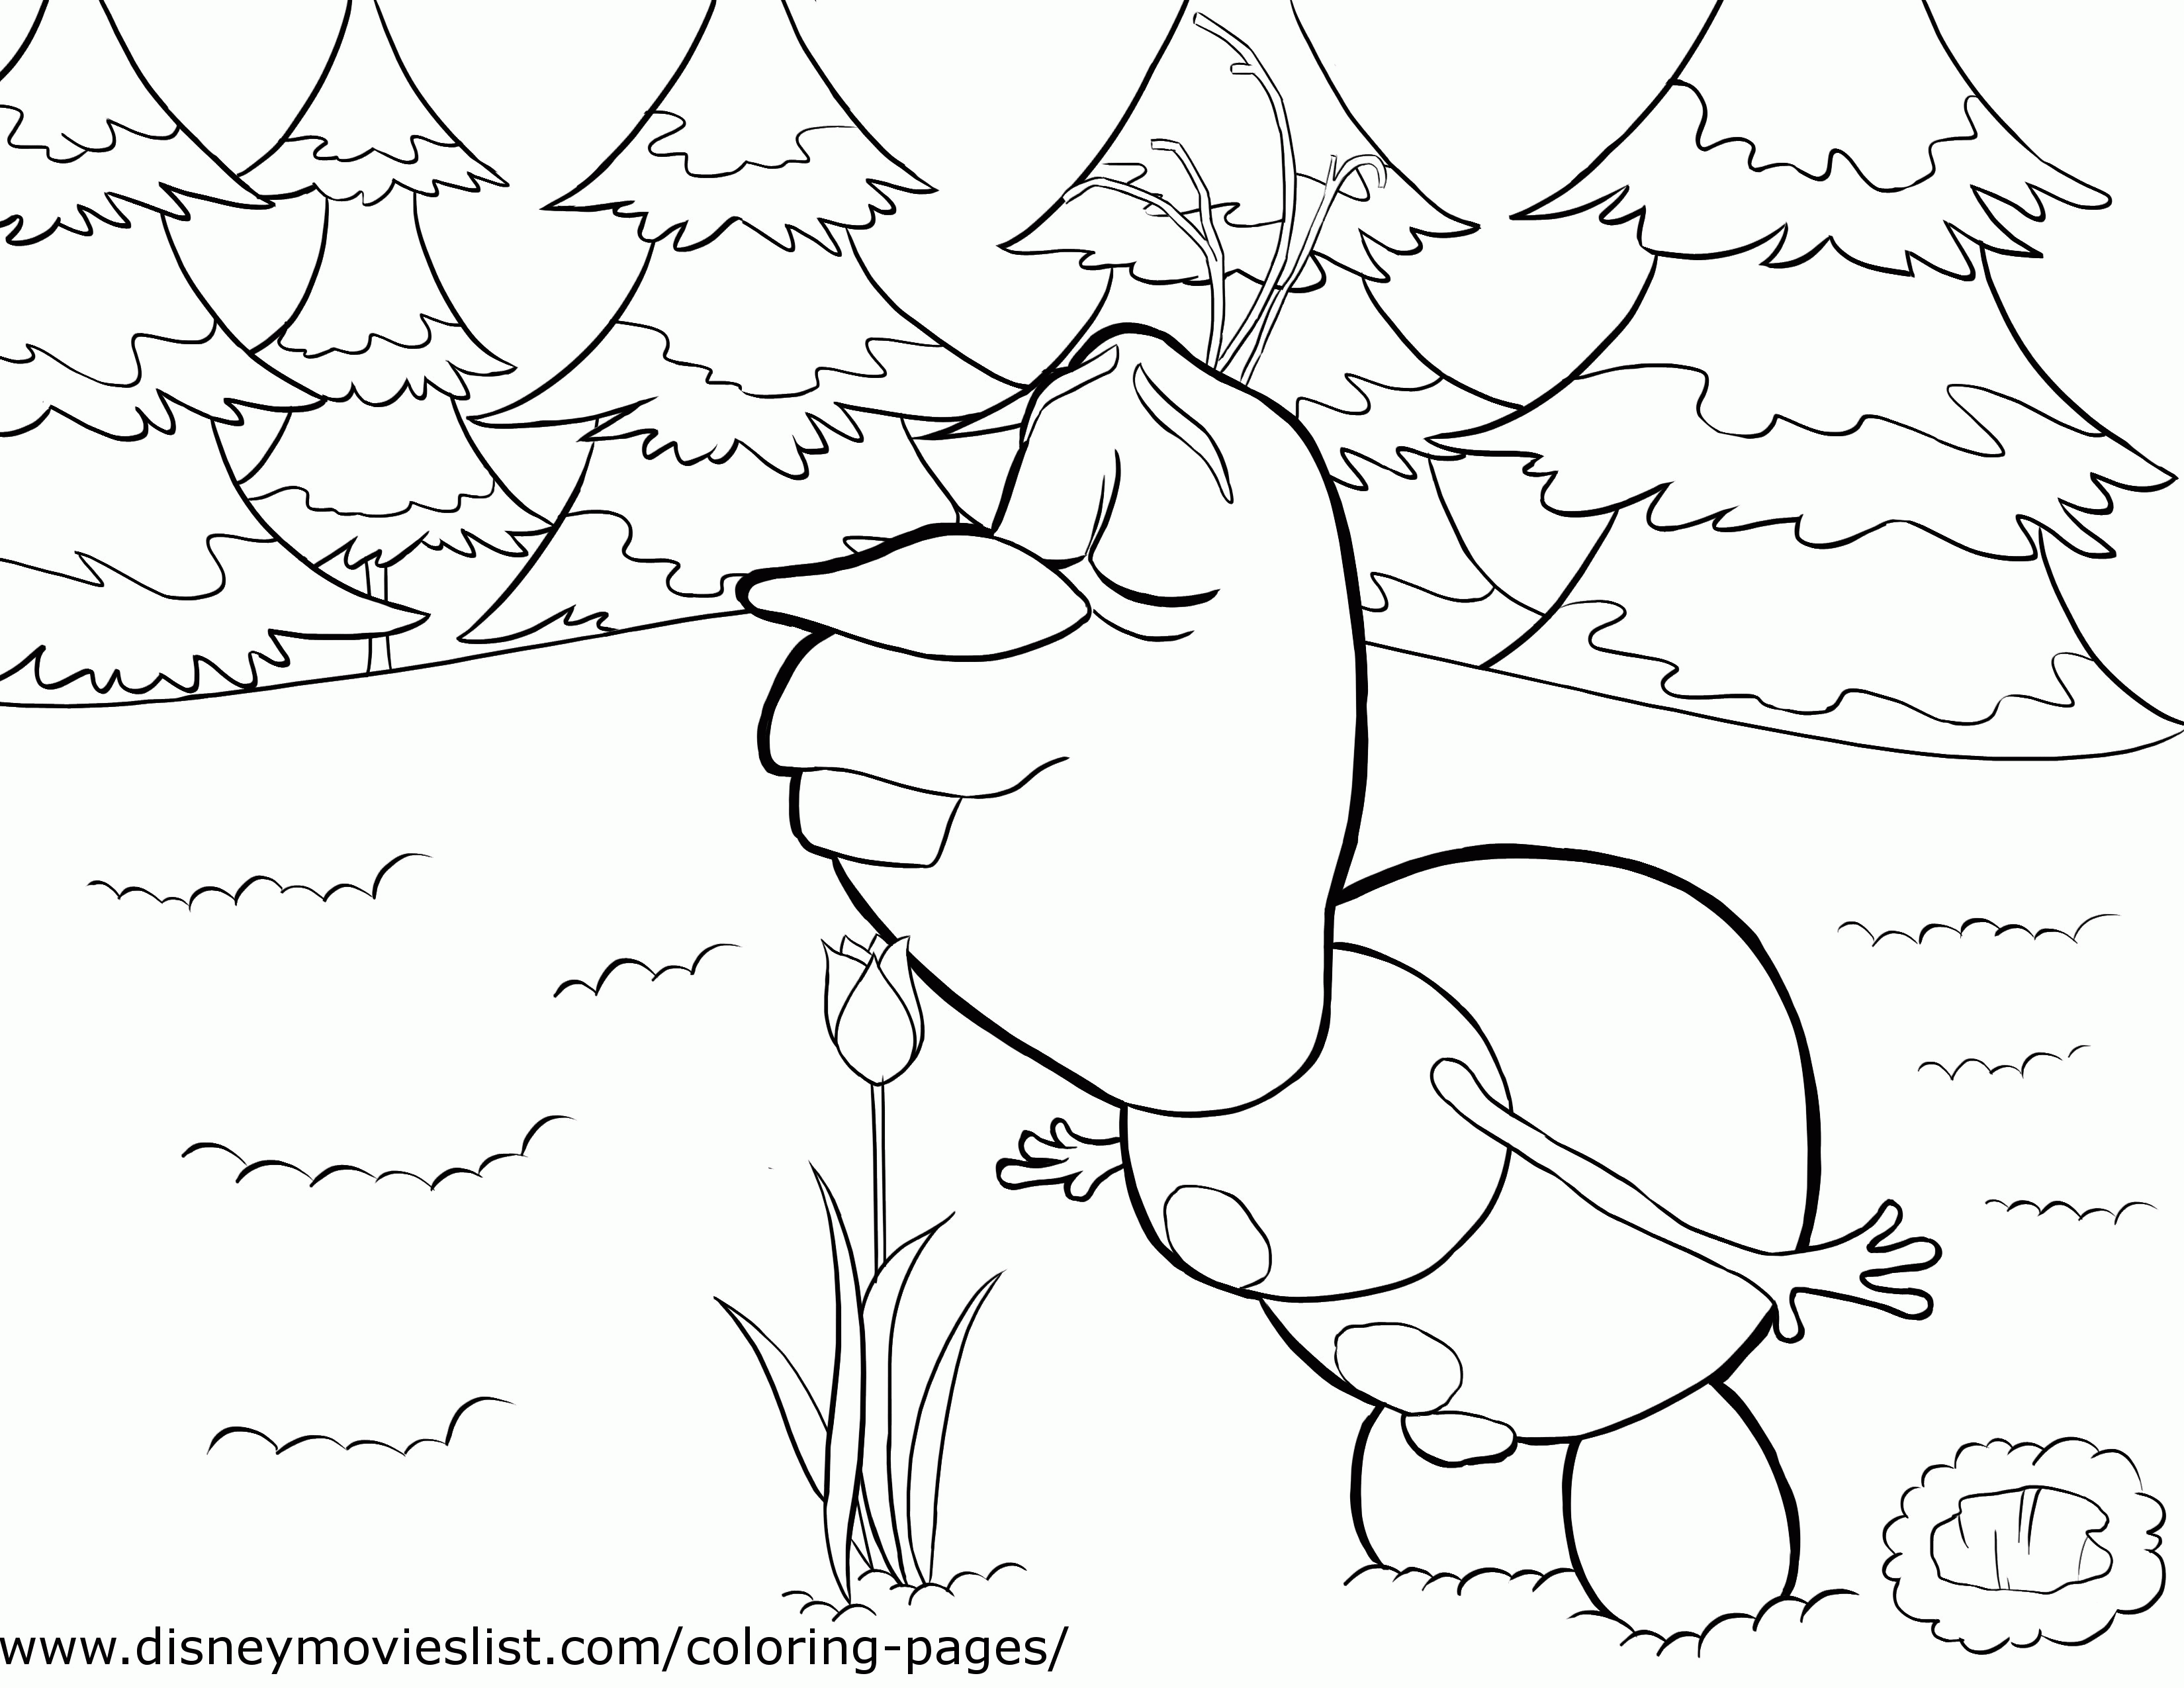 Olaf - Disney's Frozen Coloring Pages Sheet